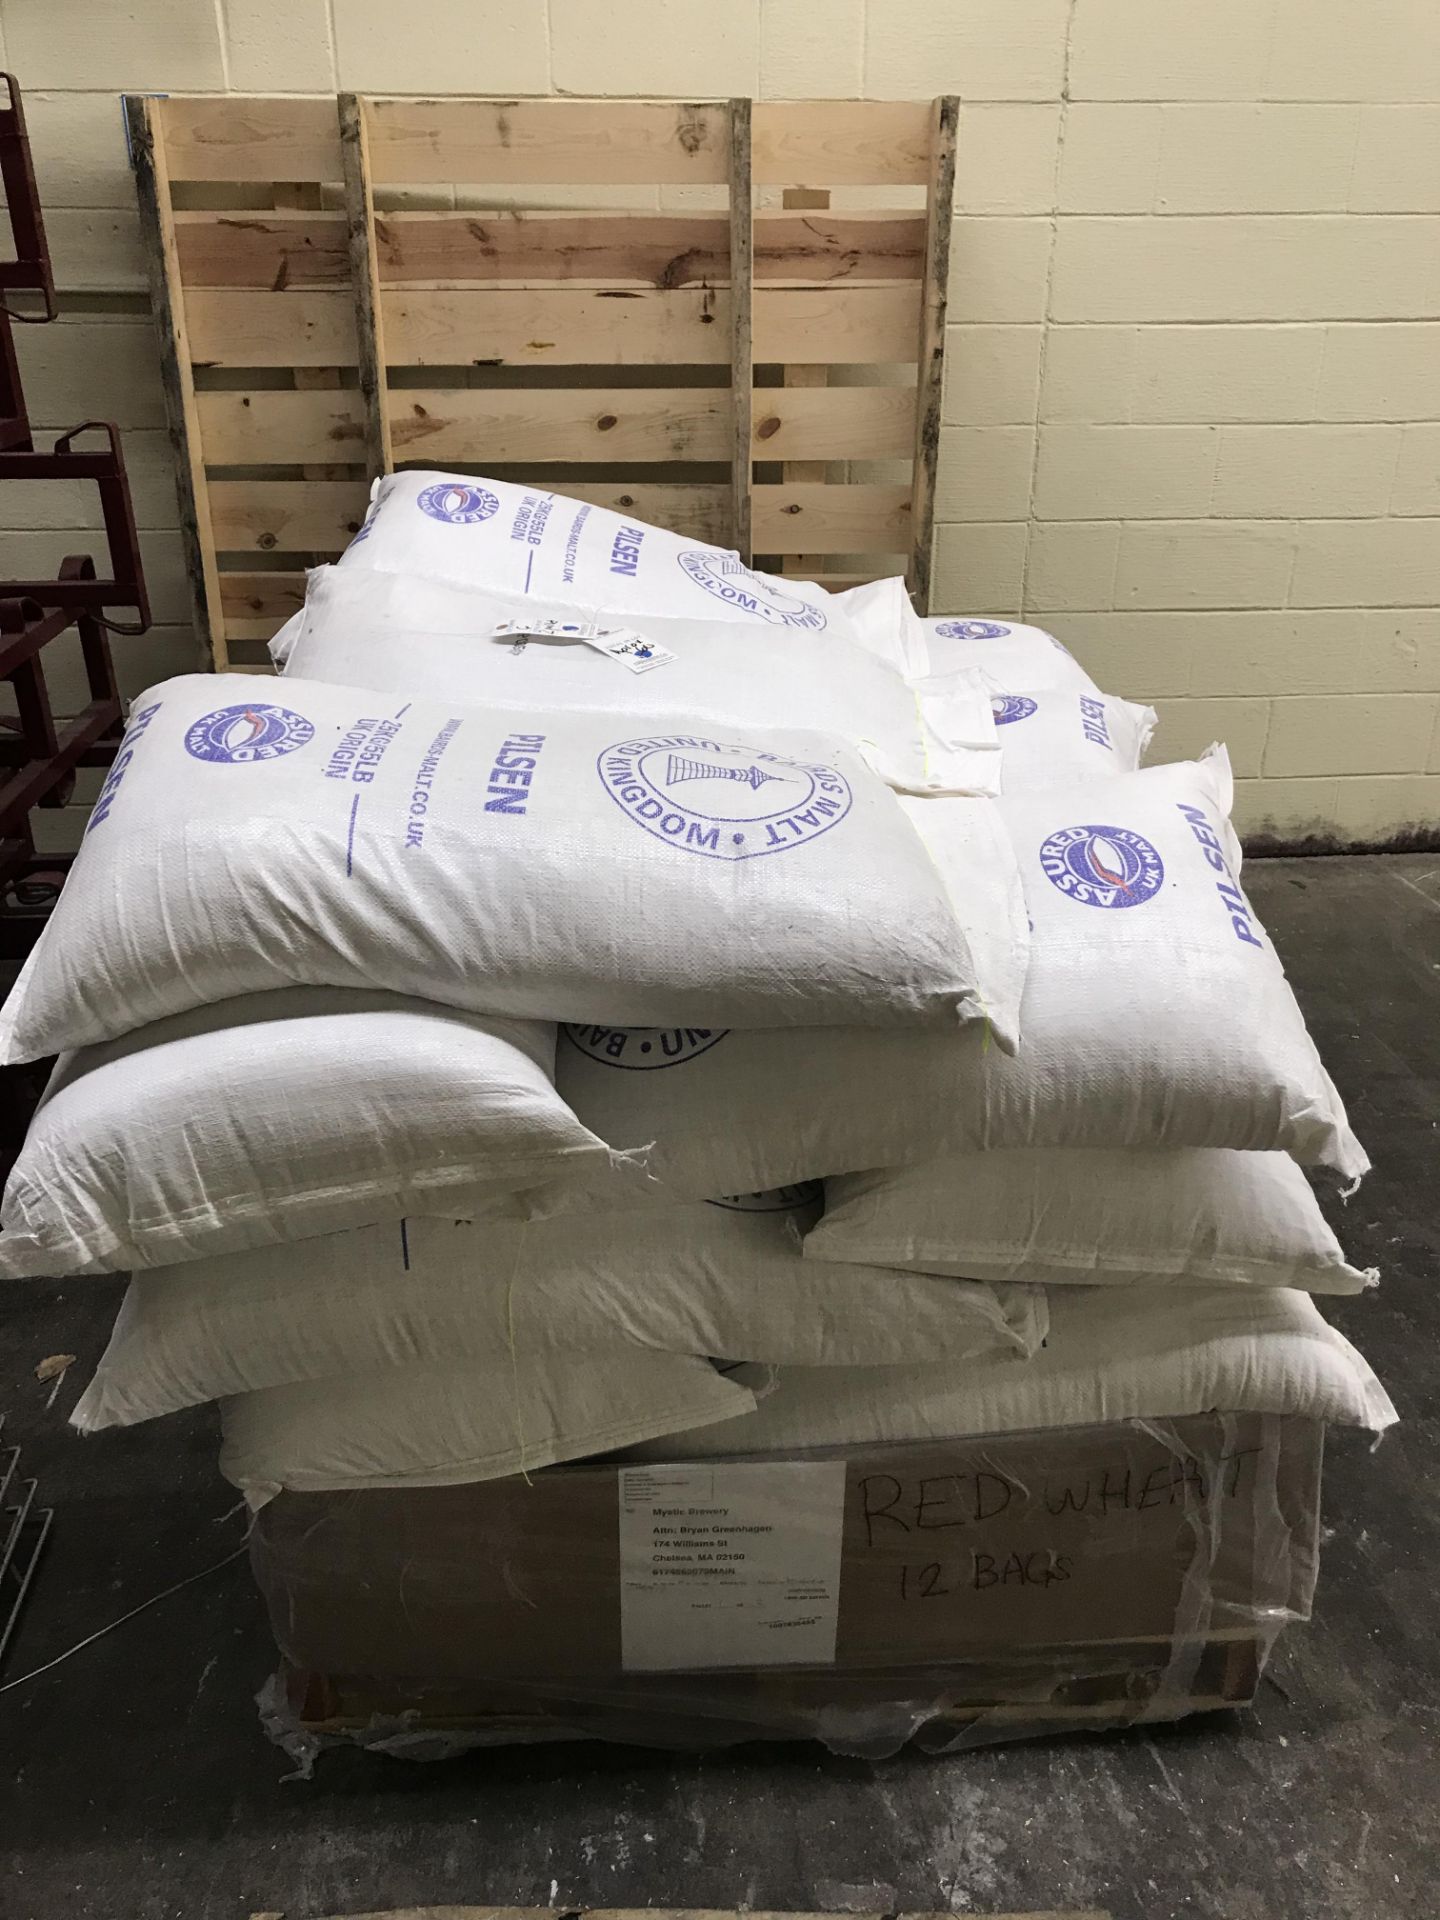 {LOT} On 2 Pallets 55 Lb. Pre Milled Ground Mill Grain Pilsen Malt Approx. 60 Bags - Image 2 of 3